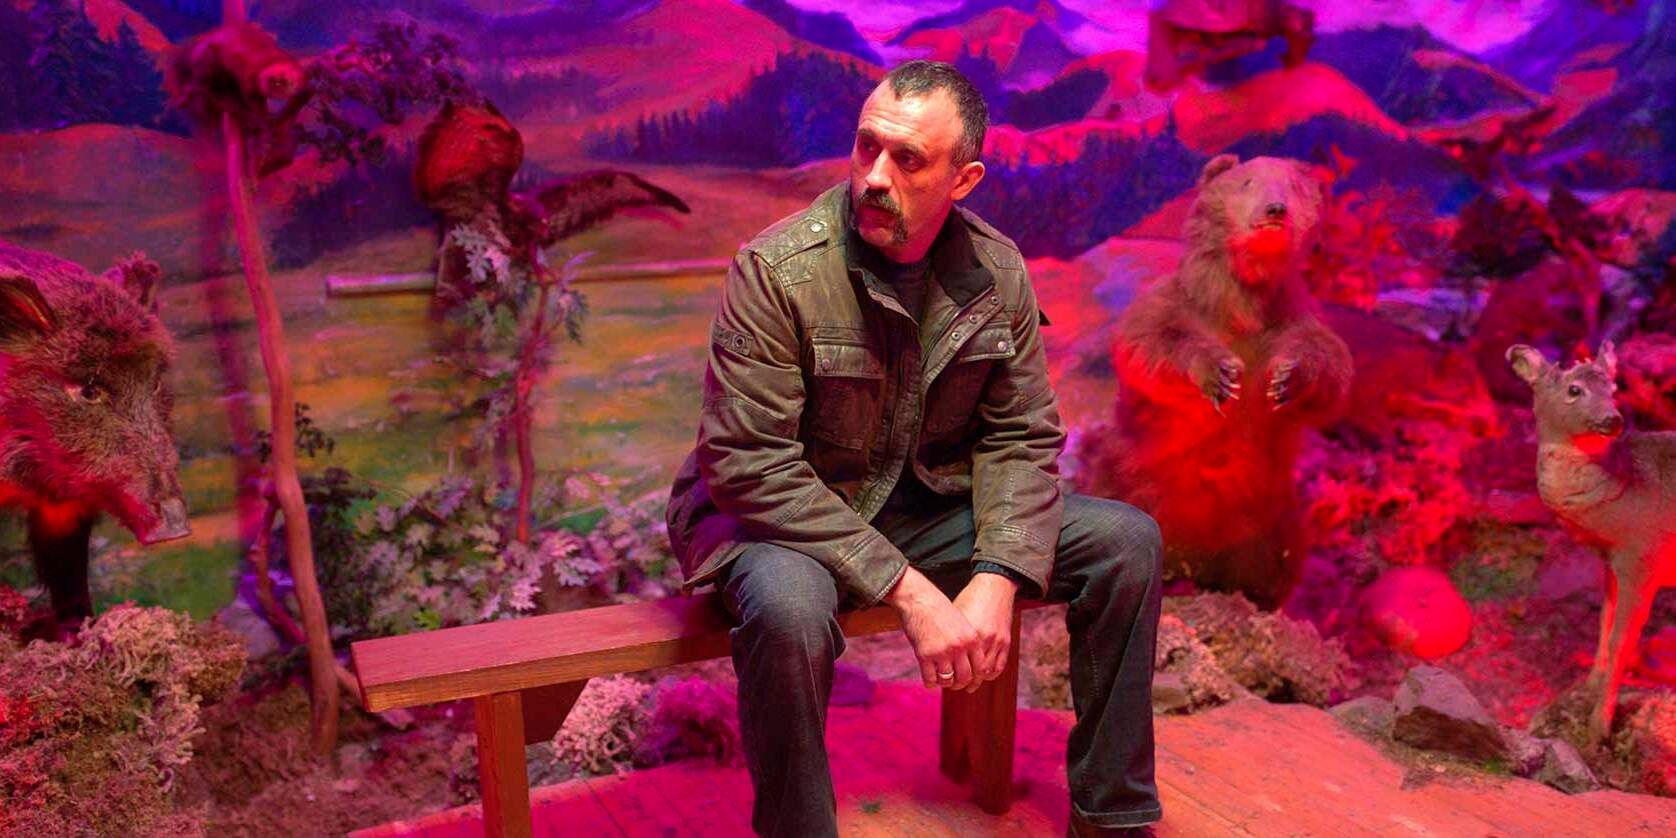 A still from the film Pamfir featuring a man sitting on a bench surrounded by diorama woodland creatures